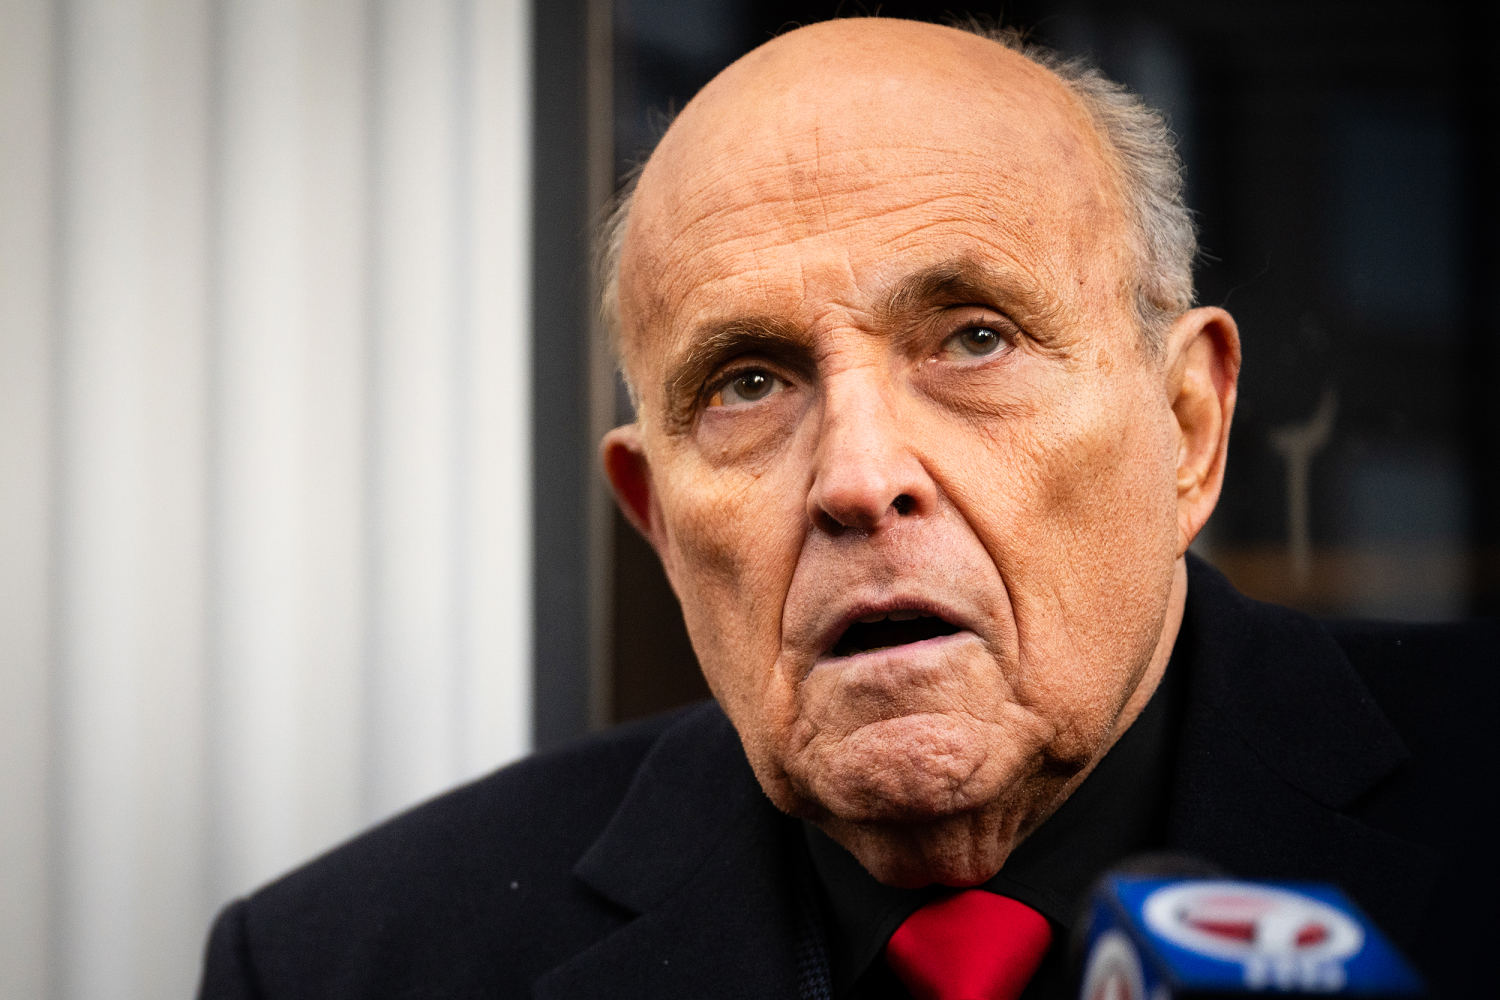 Rudy Giuliani loses game of indictment hide-and-seek with Arizona officials